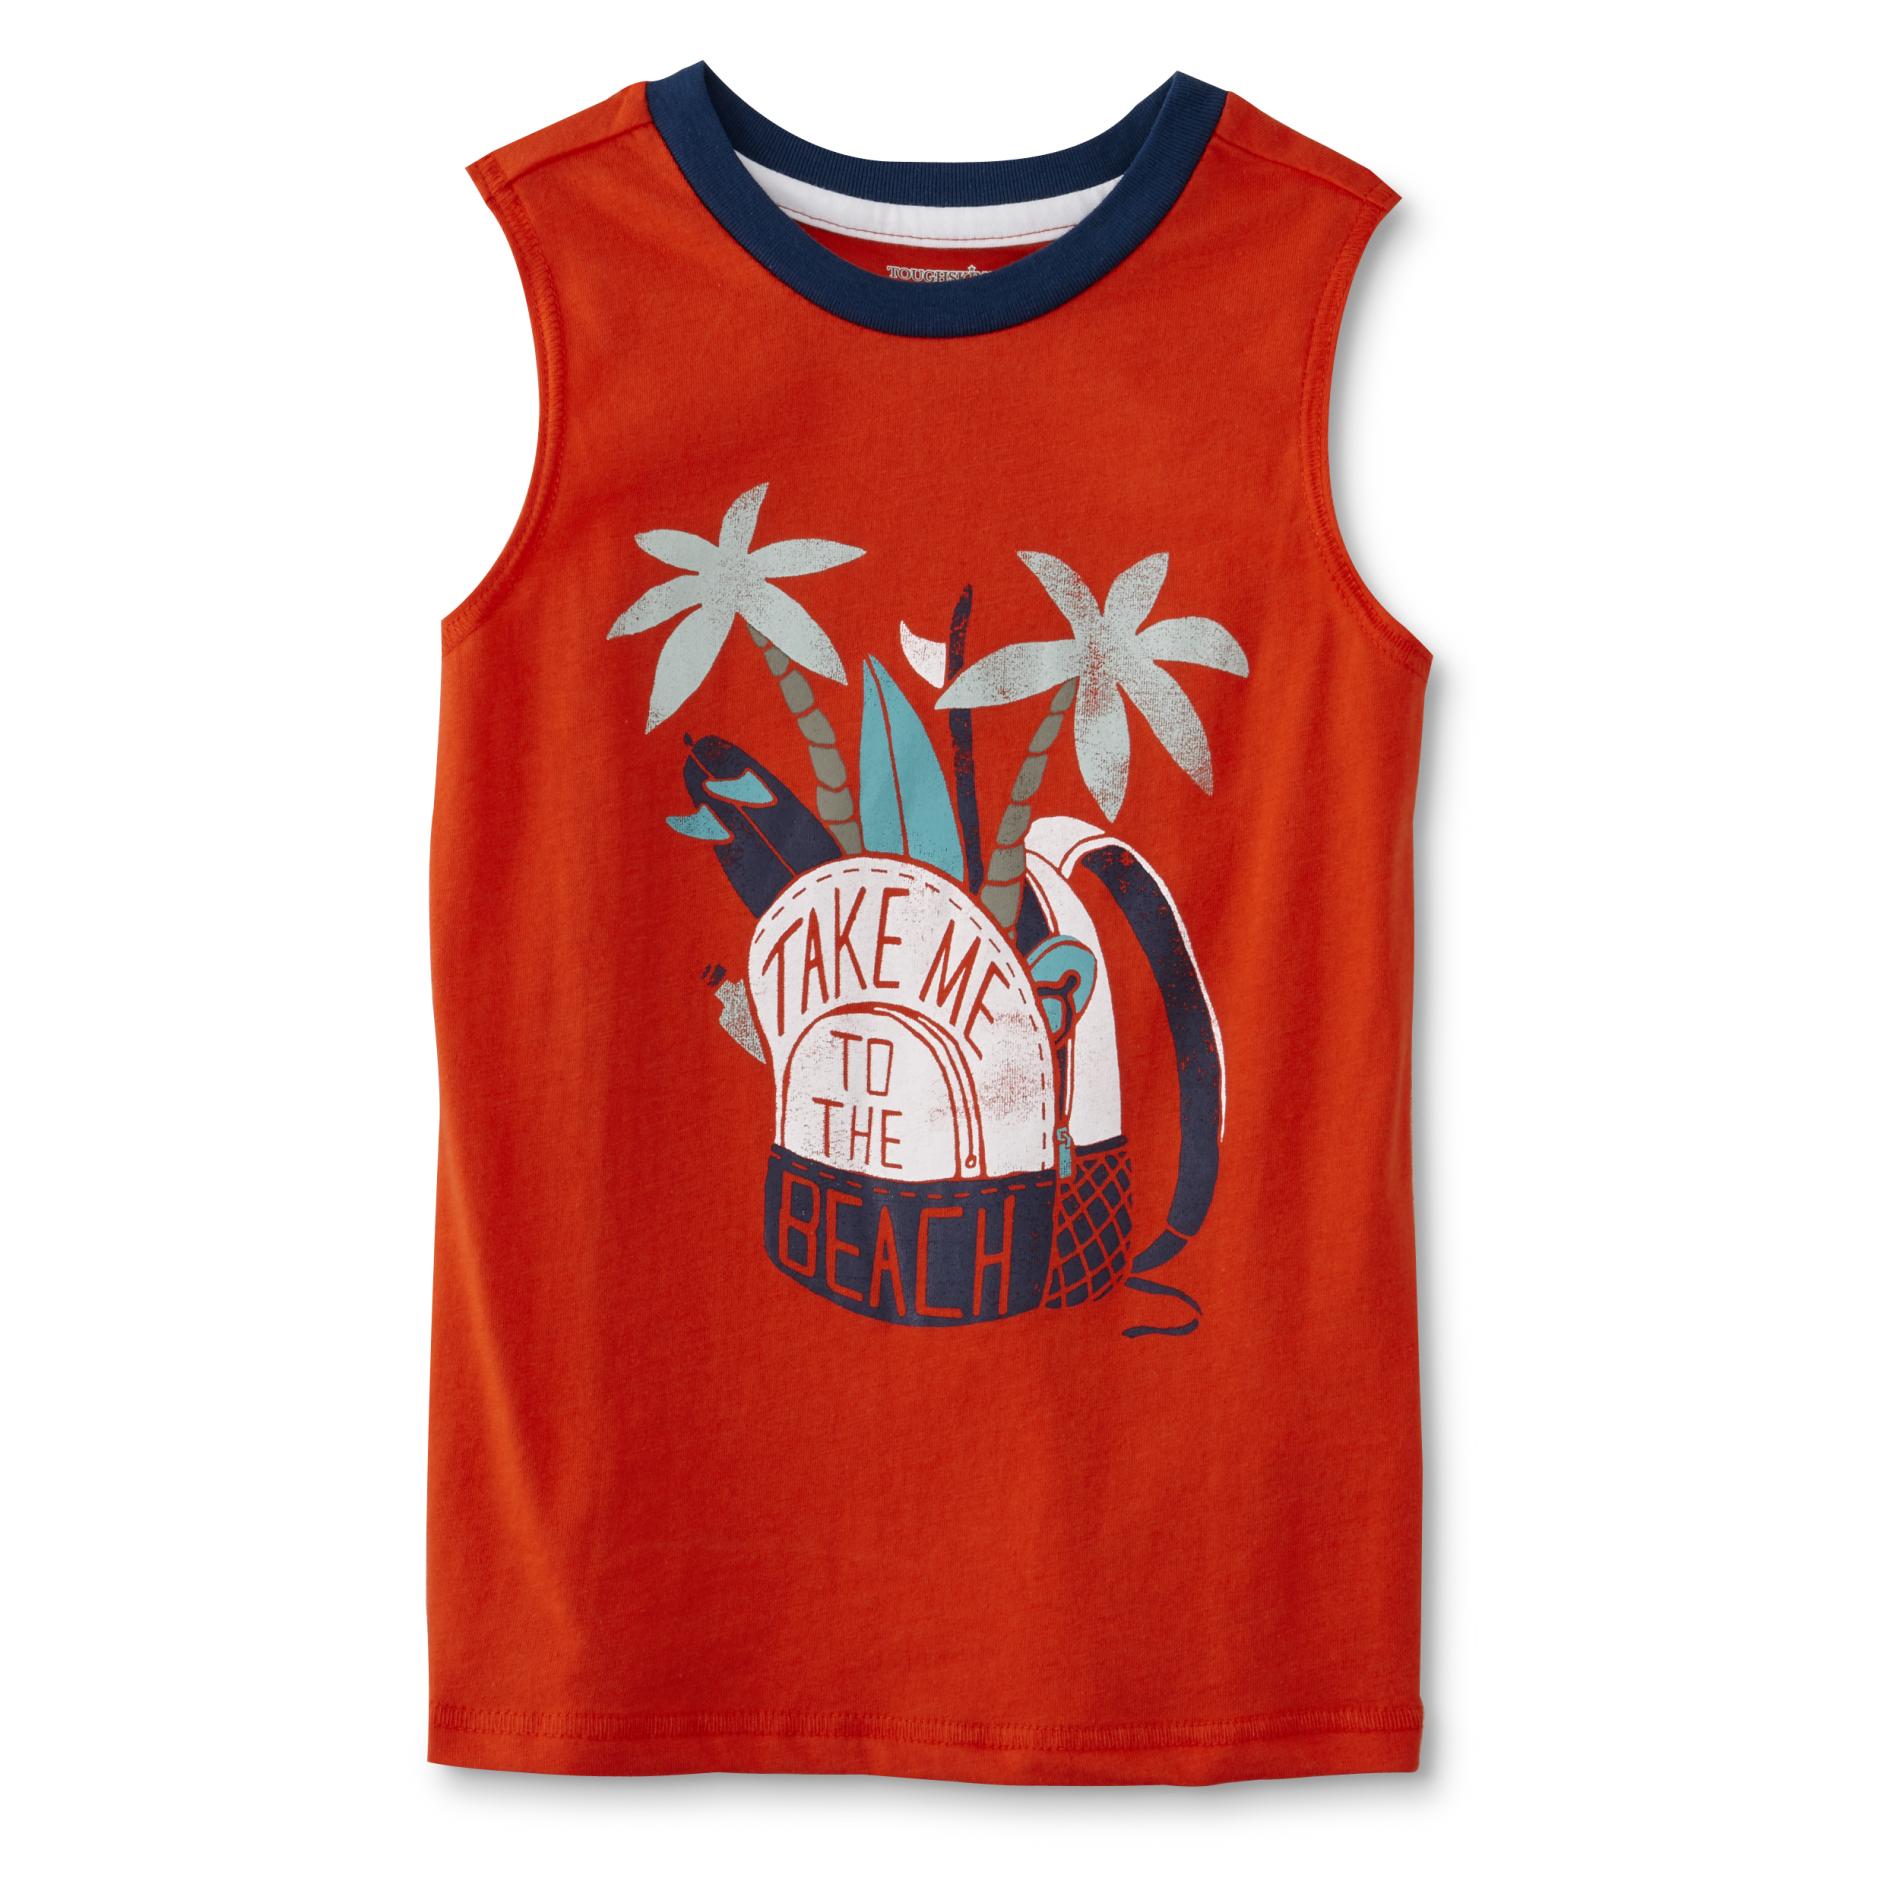 Toughskins Infant & Toddler Boys' Muscle Shirt - Take Me to The Beach